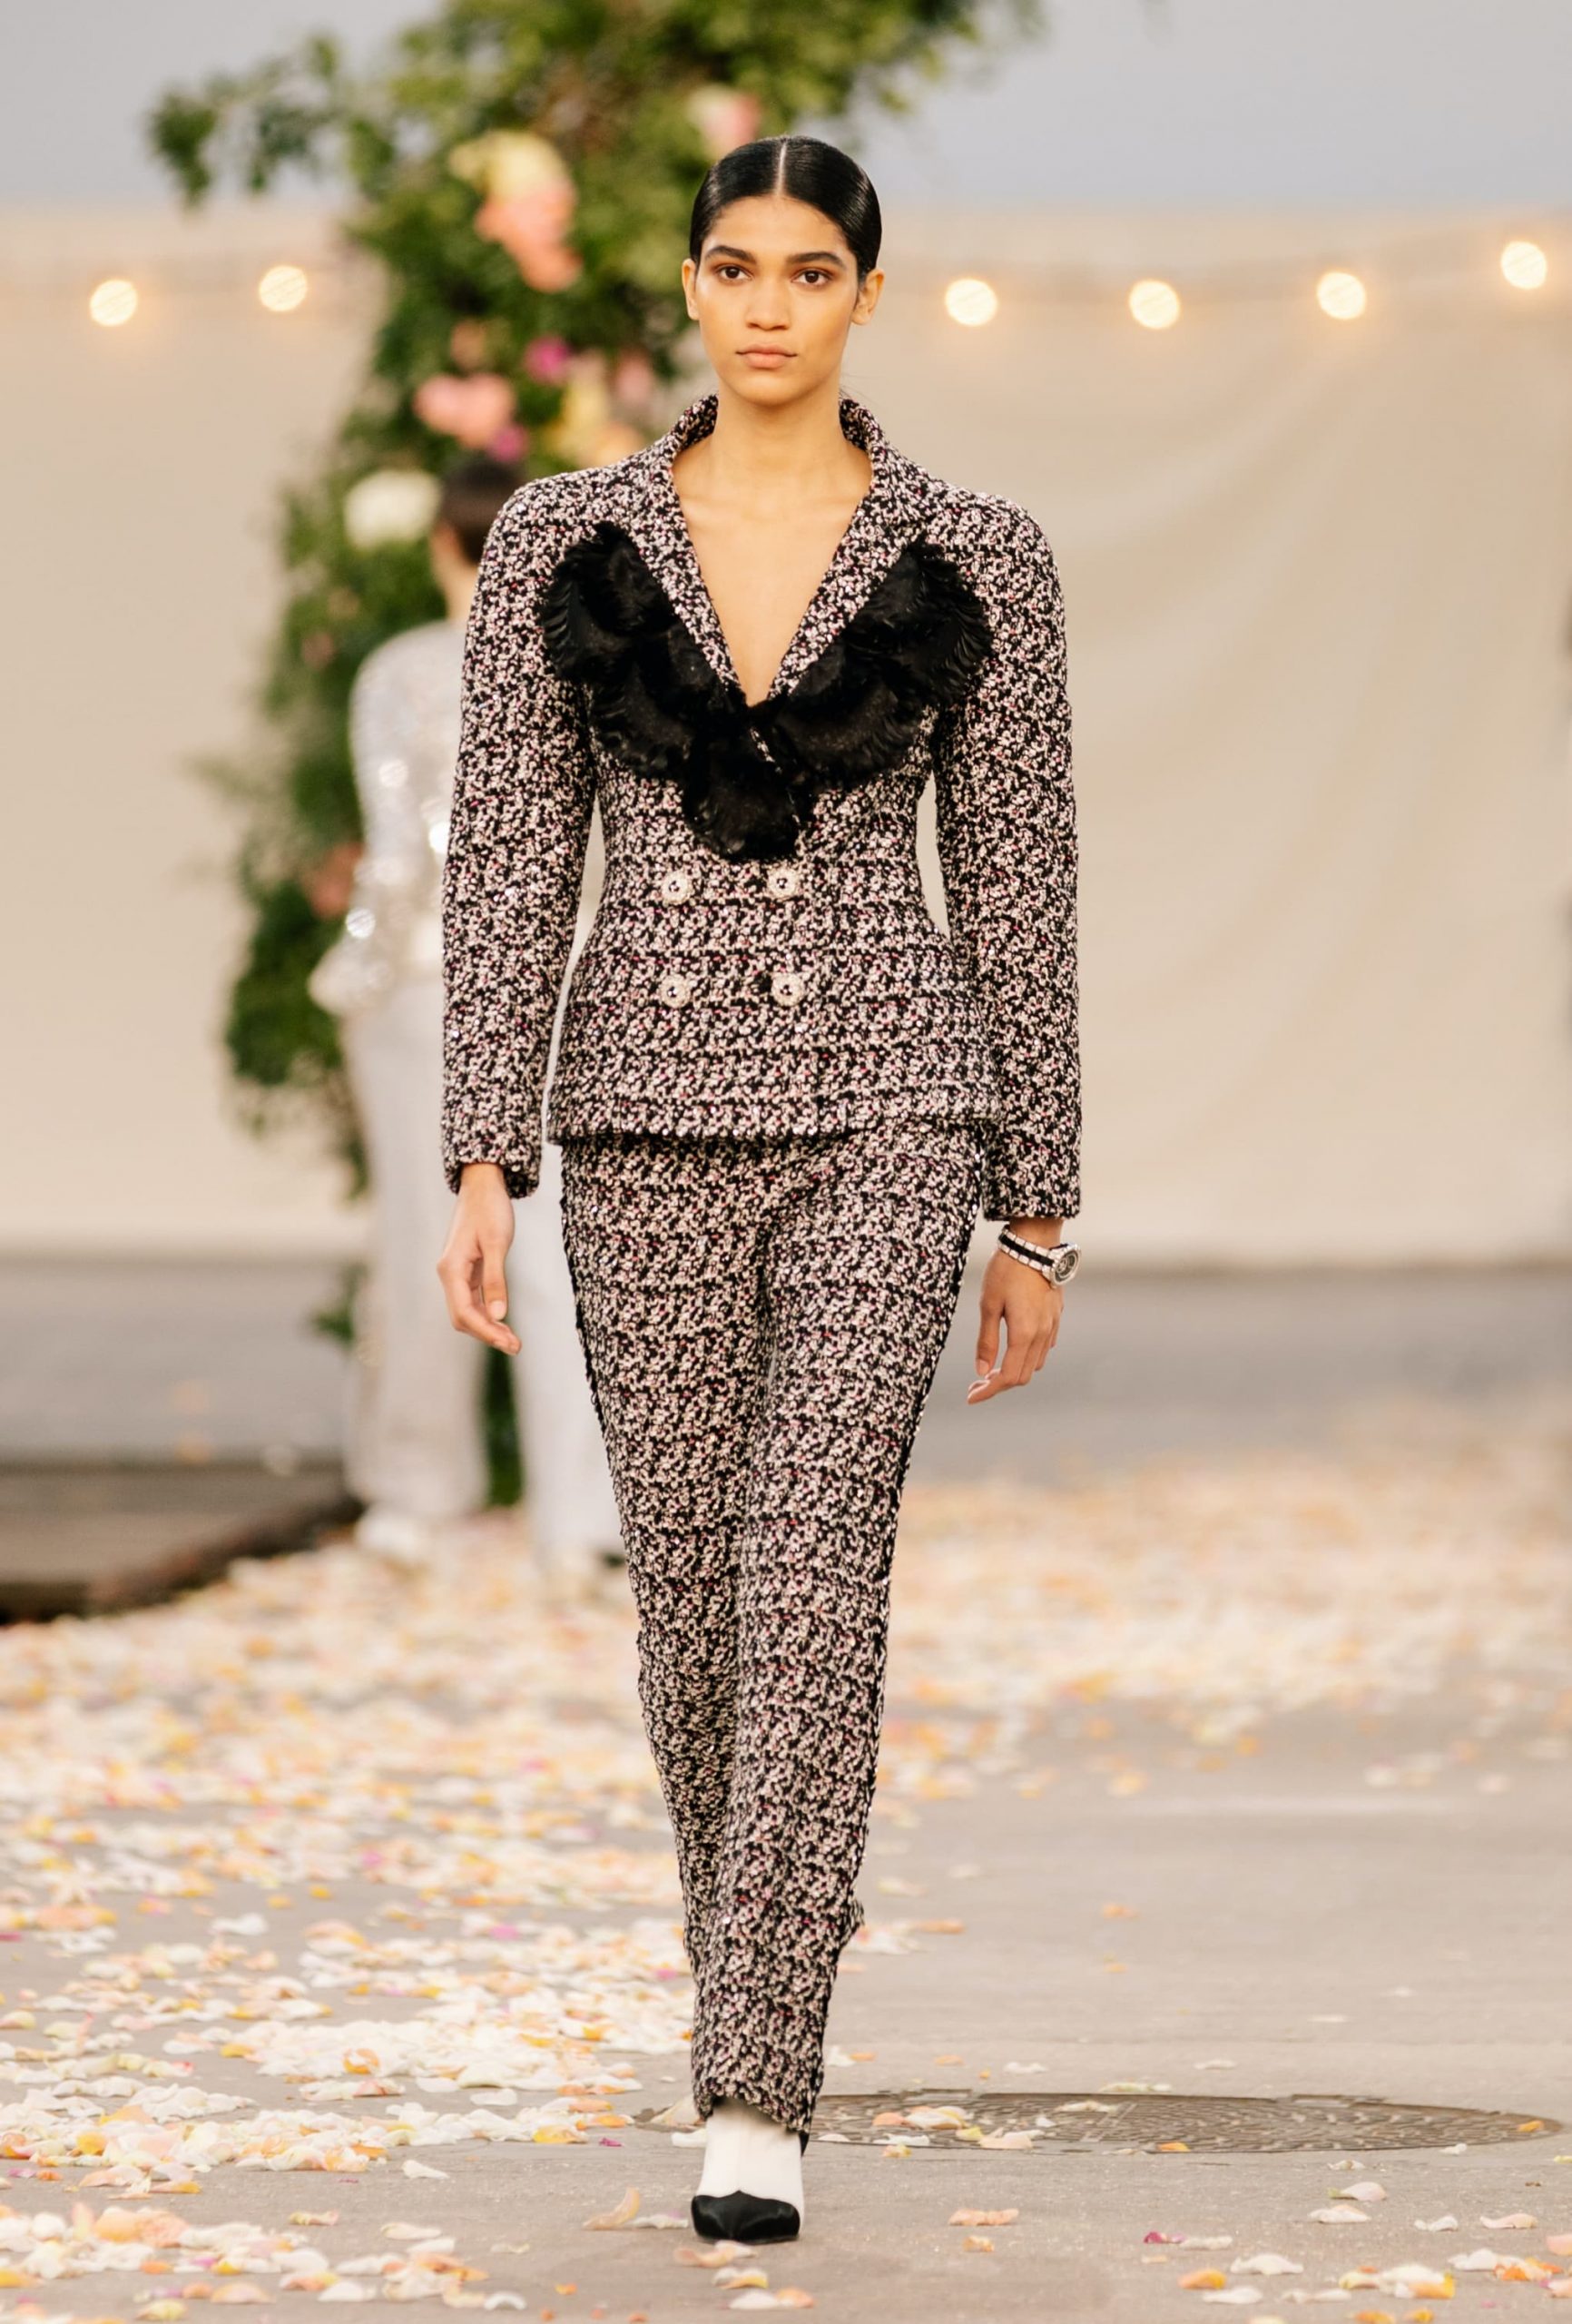 Chanel Spring 2021 Haute Couture Fashion Show Review